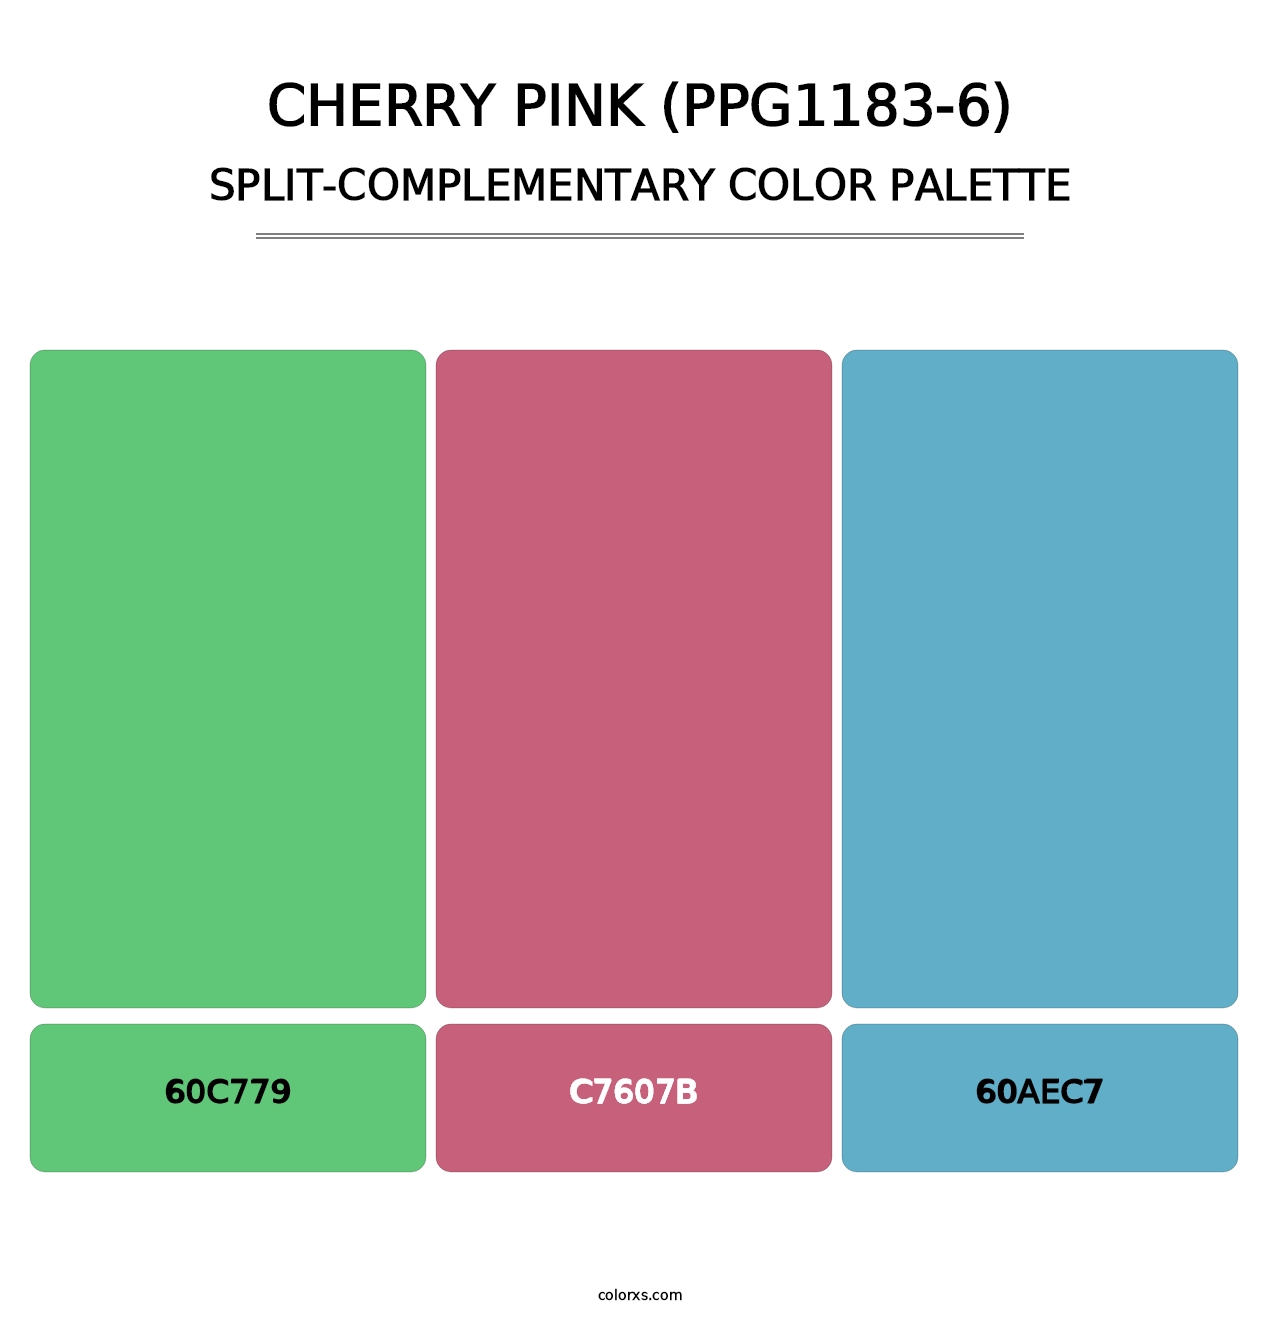 Cherry Pink (PPG1183-6) - Split-Complementary Color Palette